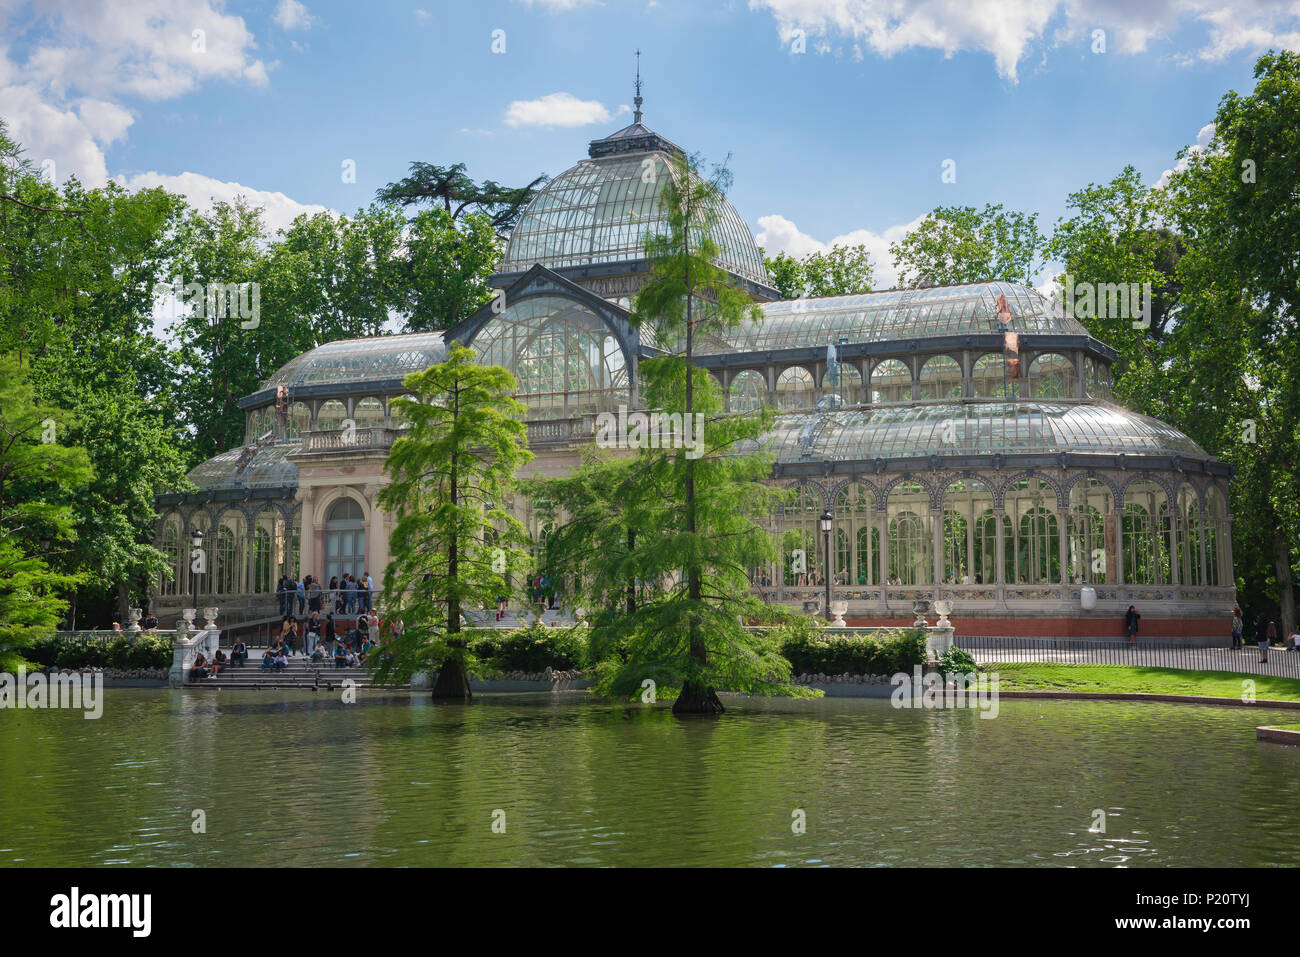 Crystal Palace Madrid, view of the Palacio Cristal and lake in the centre of the Parque del Retiro in Madrid, Spain. Stock Photo